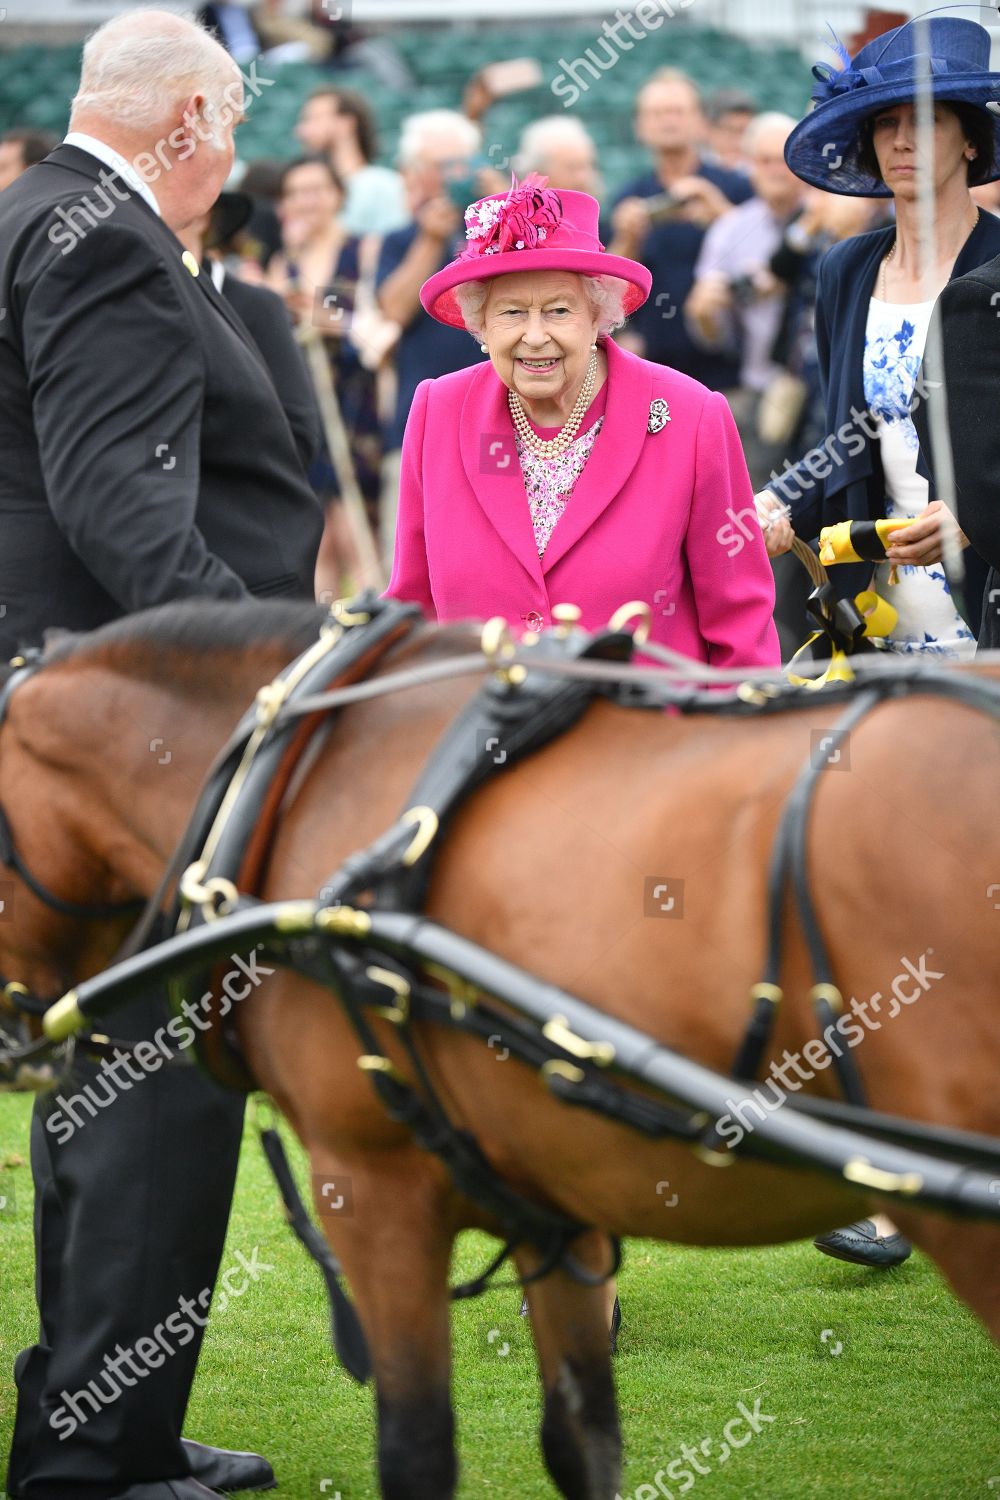 out-sourcing-royal-windsor-cup-polo-match-windsor-uk-shutterstock-editorial-10319786ah.jpg